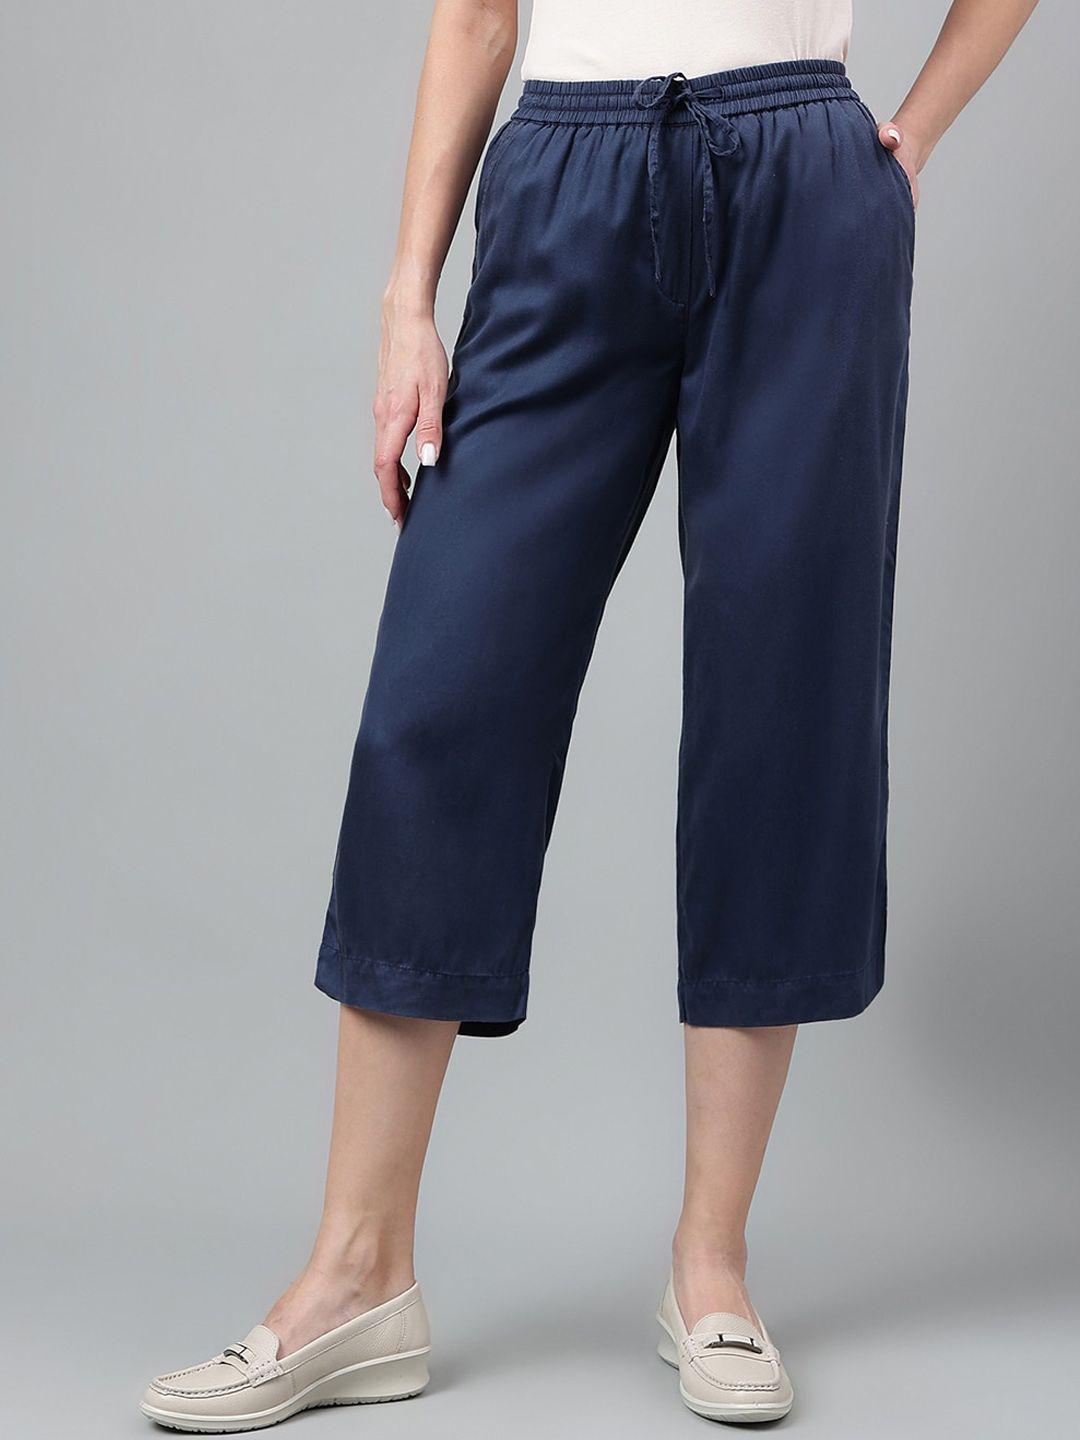 woodland women low-rise culottes trousers